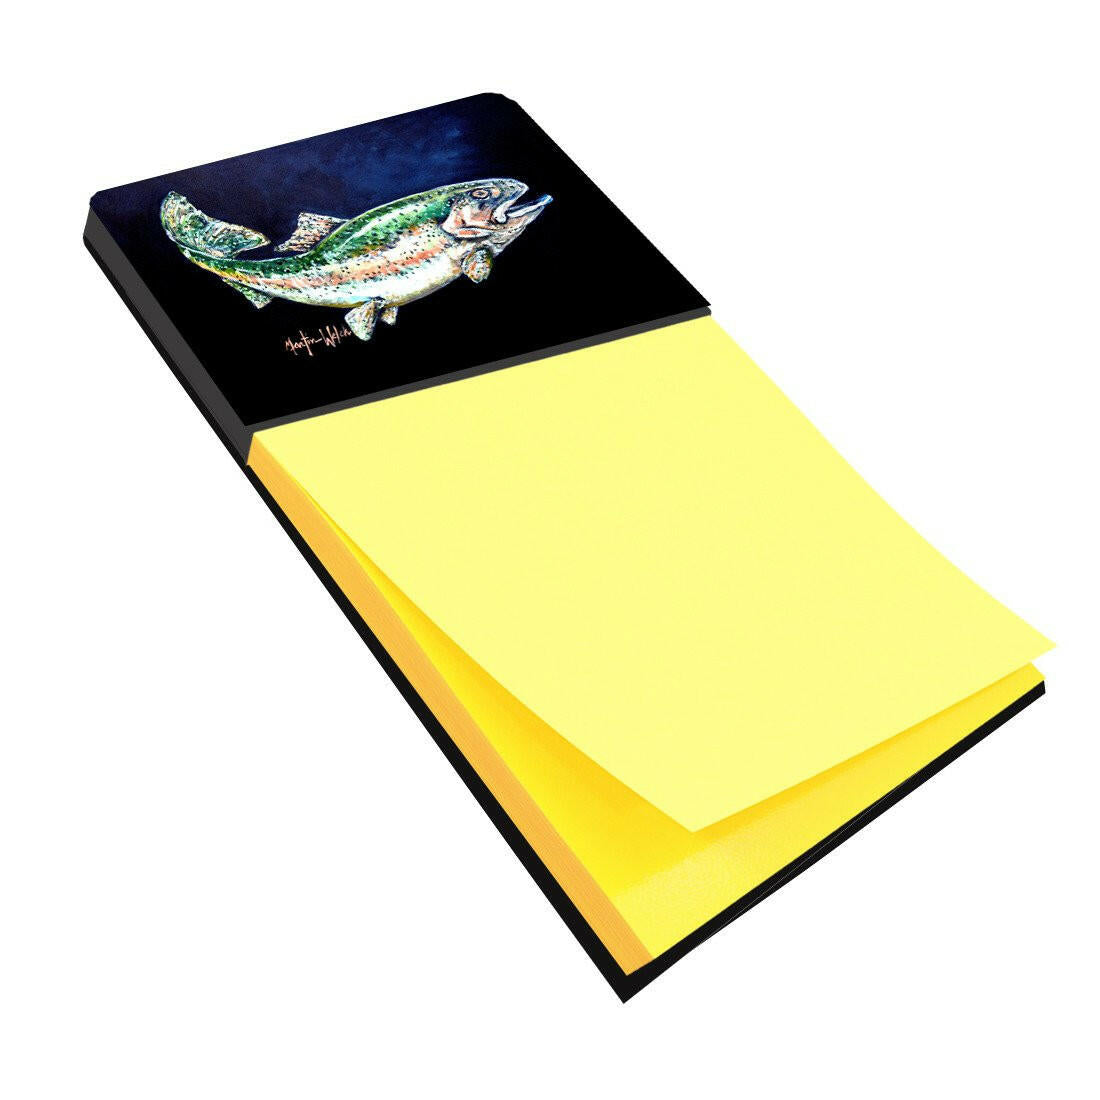 Deep Blue Rainbow Trout Sticky Note Holder MW1213SN by Caroline's Treasures